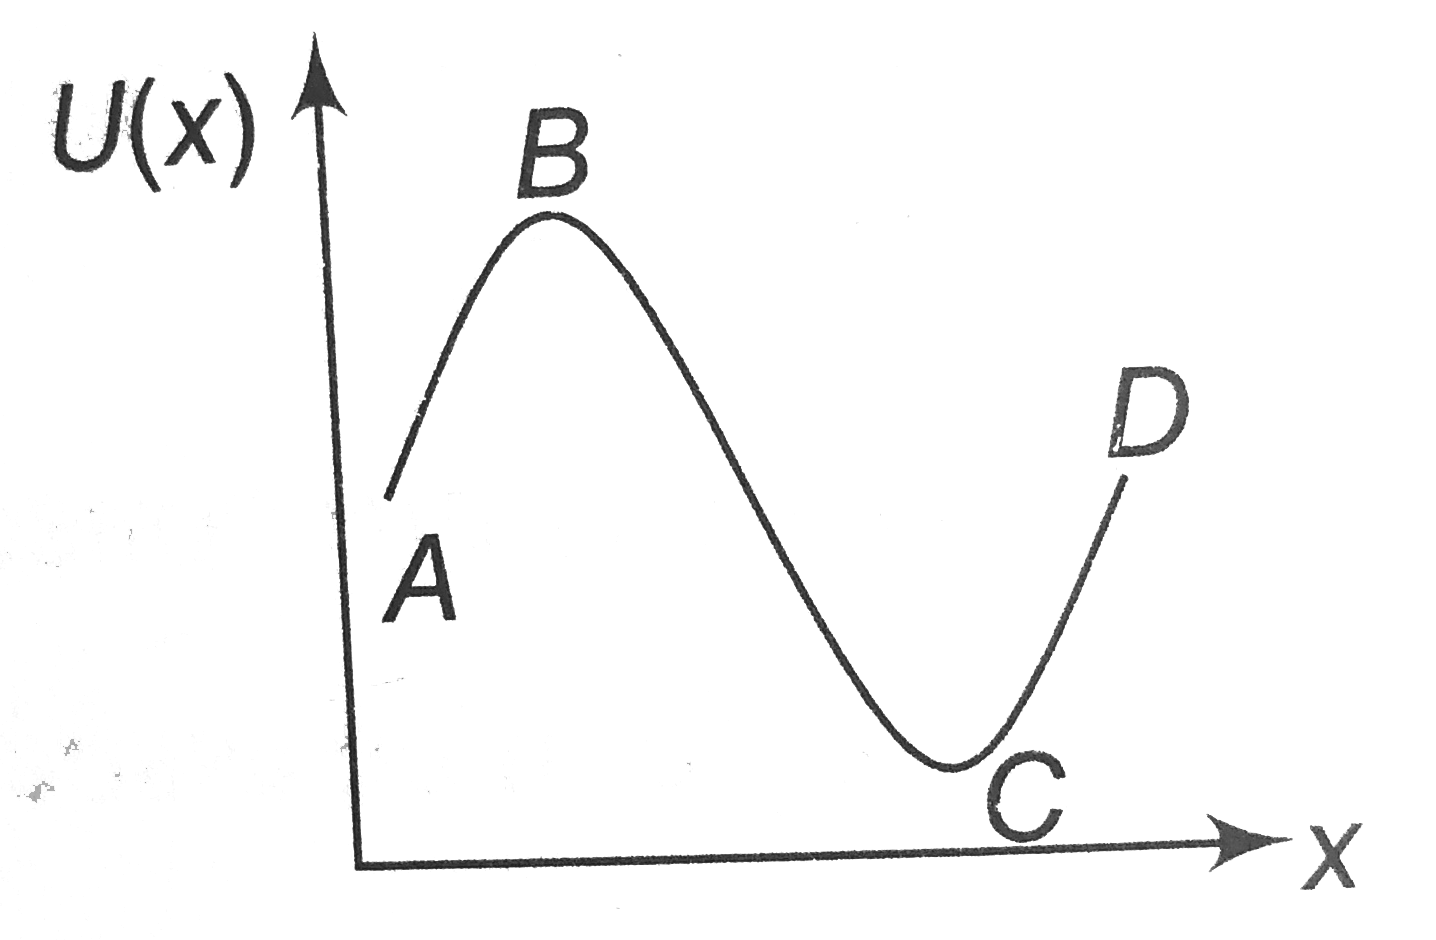 The potential energy of a partical veries with distance x as shown in the graph.      The force acting on the partical is zero at